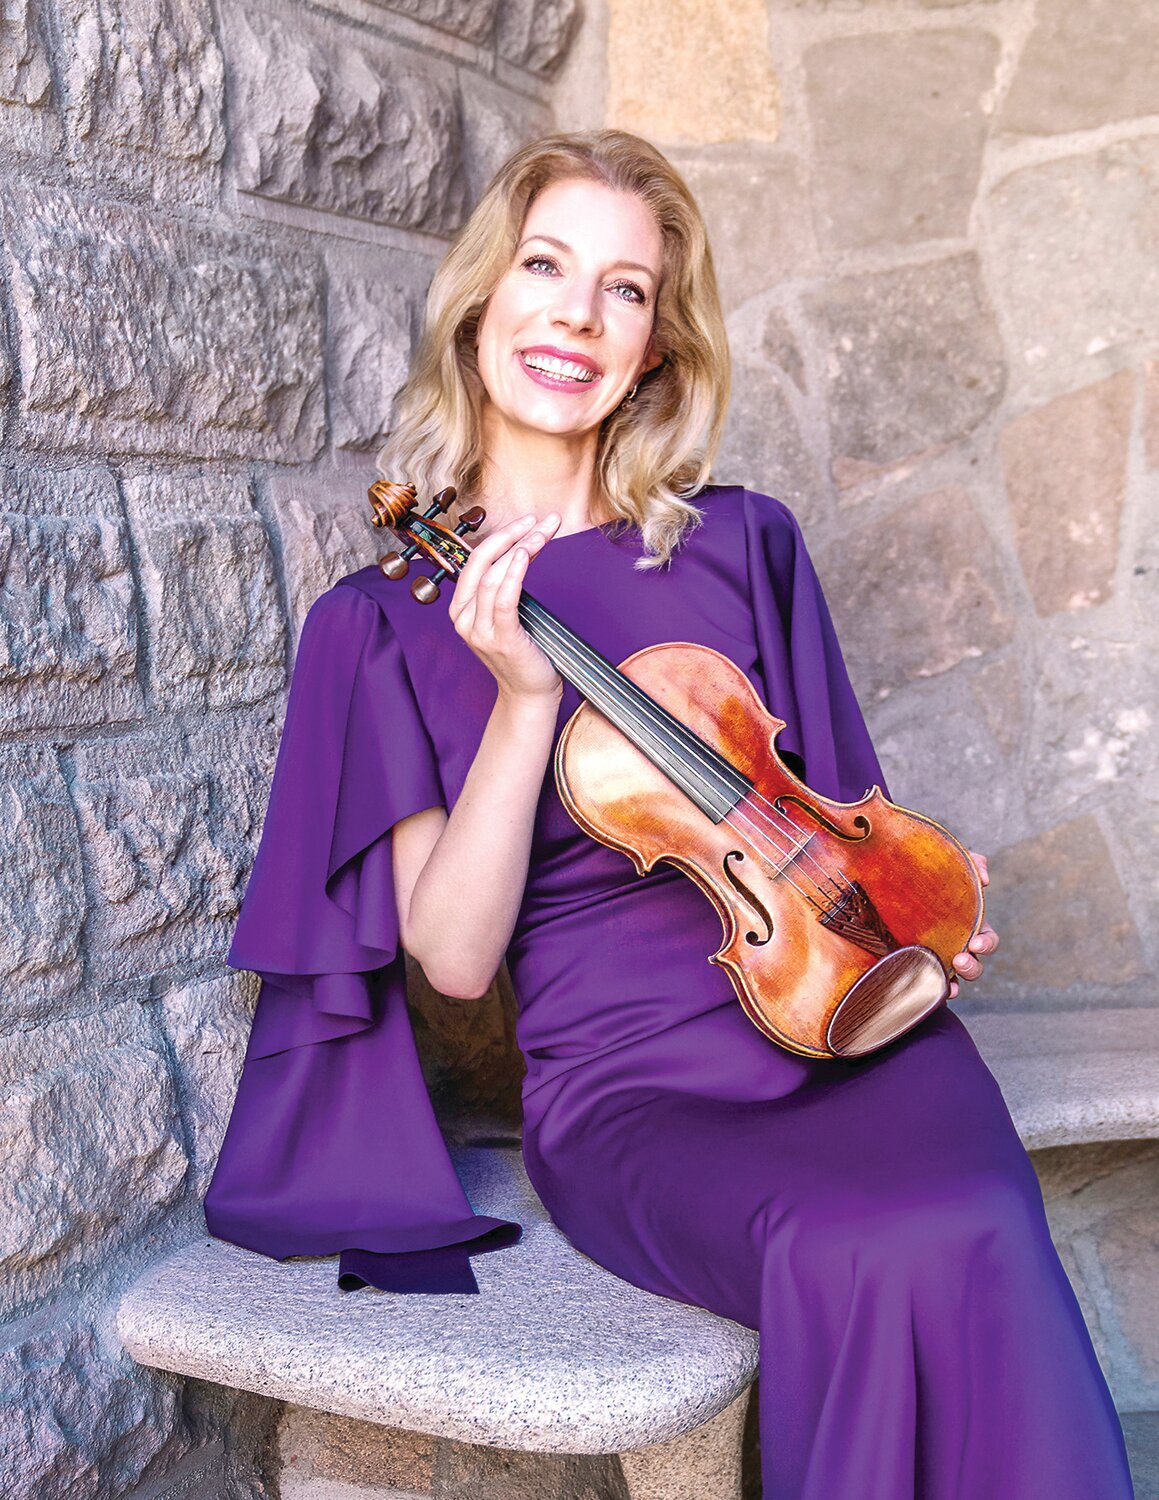 Elizabeth Pitcairn and her “Red Mendelssohn” Stradivarius violin will join Bucks County Symphony Orchestra for its Spring Concert.